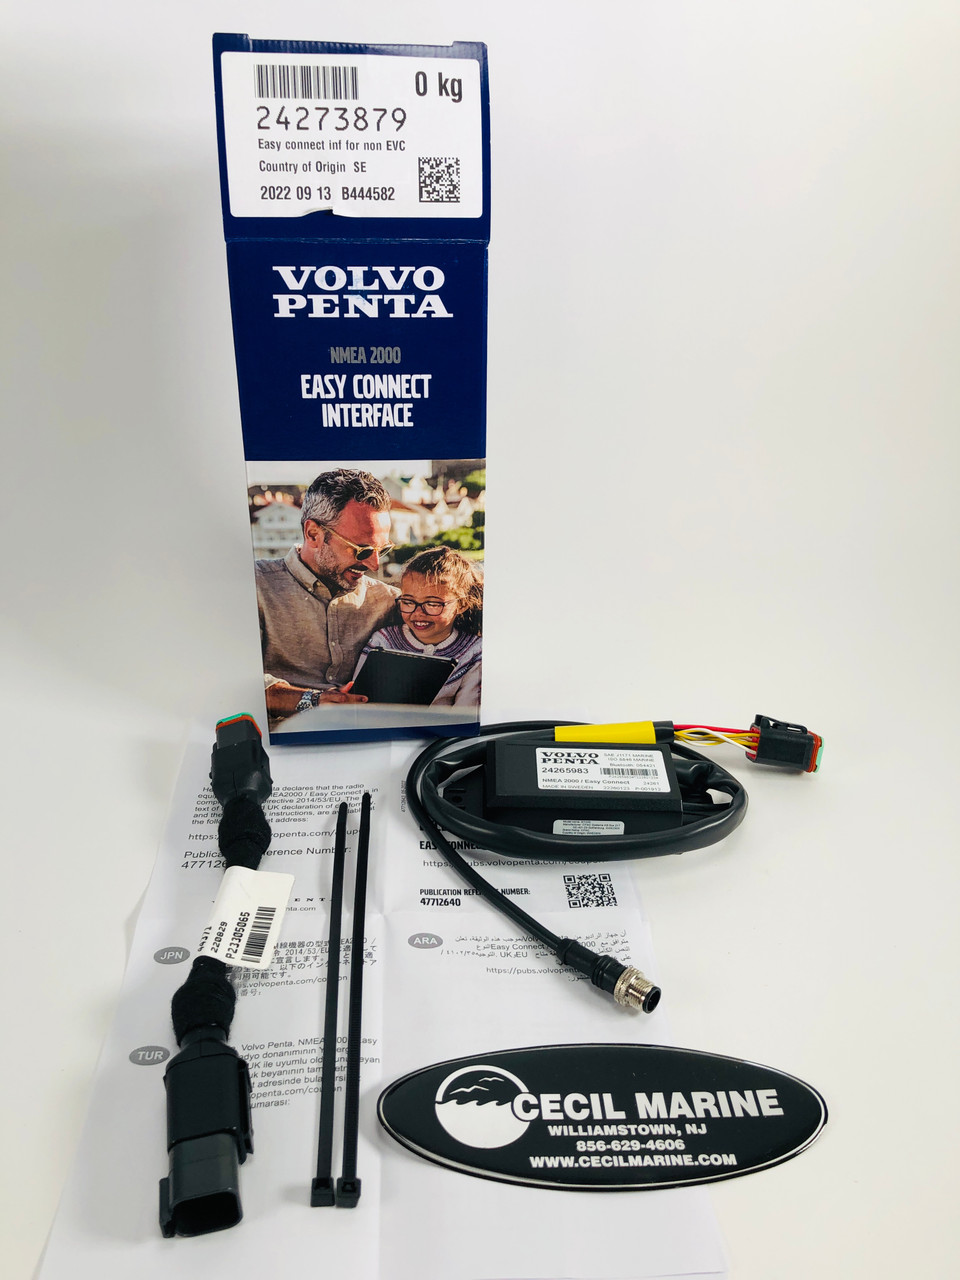 $449.99* GENUINE VOLVO no tax* EASY CONNECT GATEWAY 24273879 *In Stock & Ready To Ship!